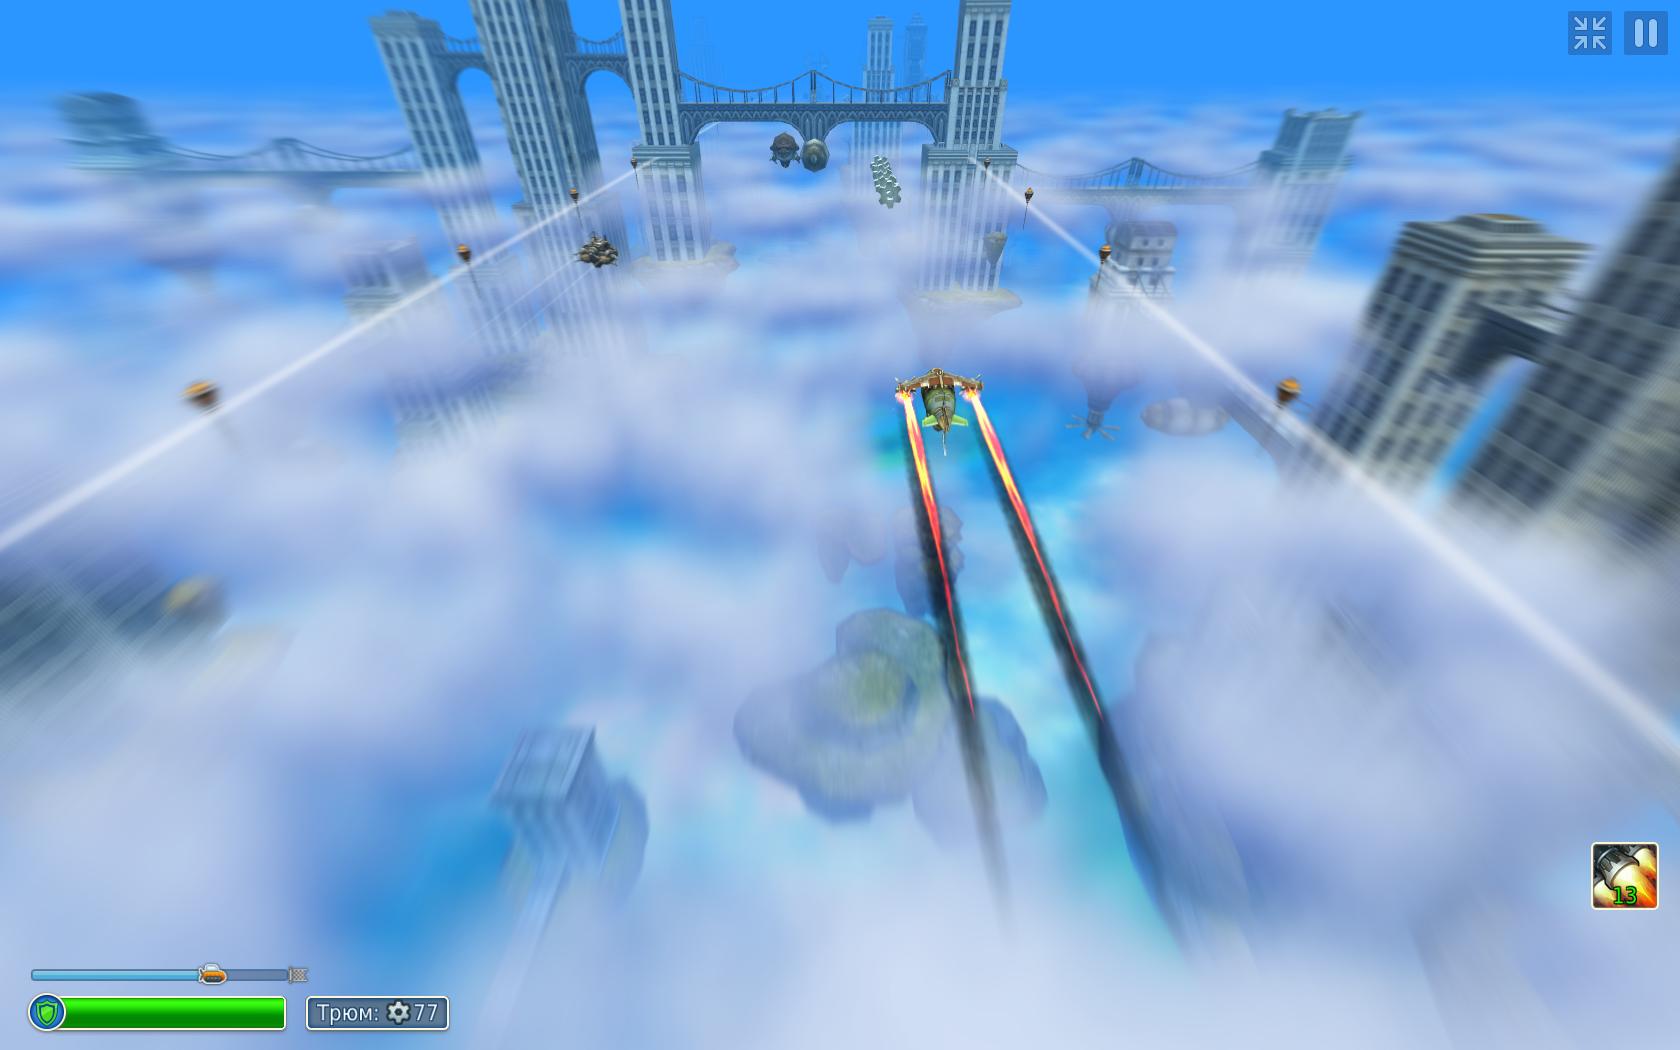 83421846919_sky-to-fly-faster-than-wind-2016-steam-rip-ot-letsplay-pc.jpg